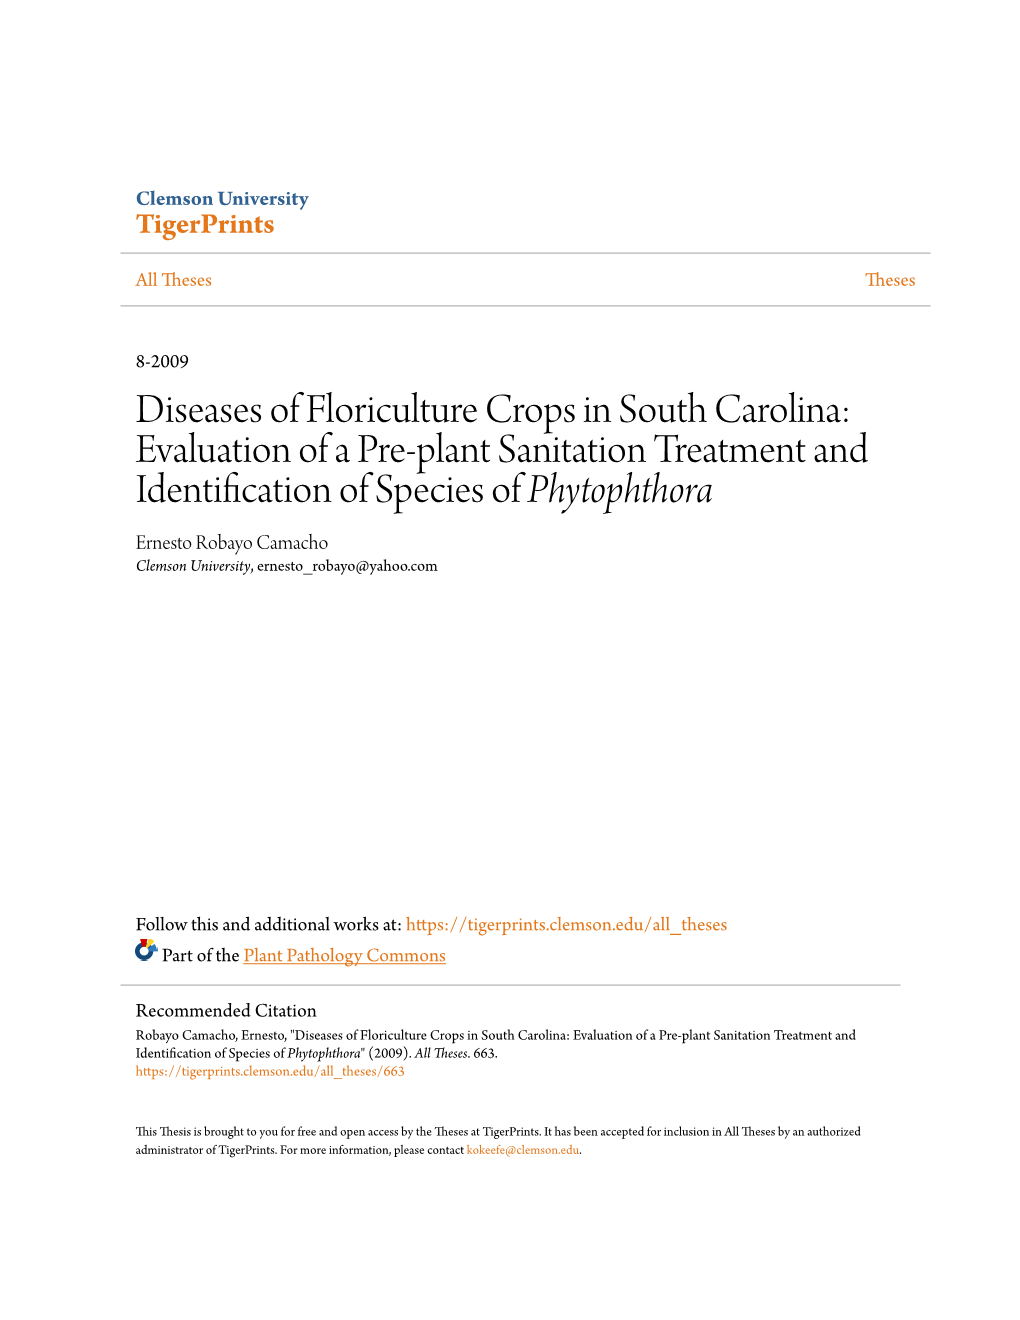 Diseases of Floriculture Crops in South Carolina